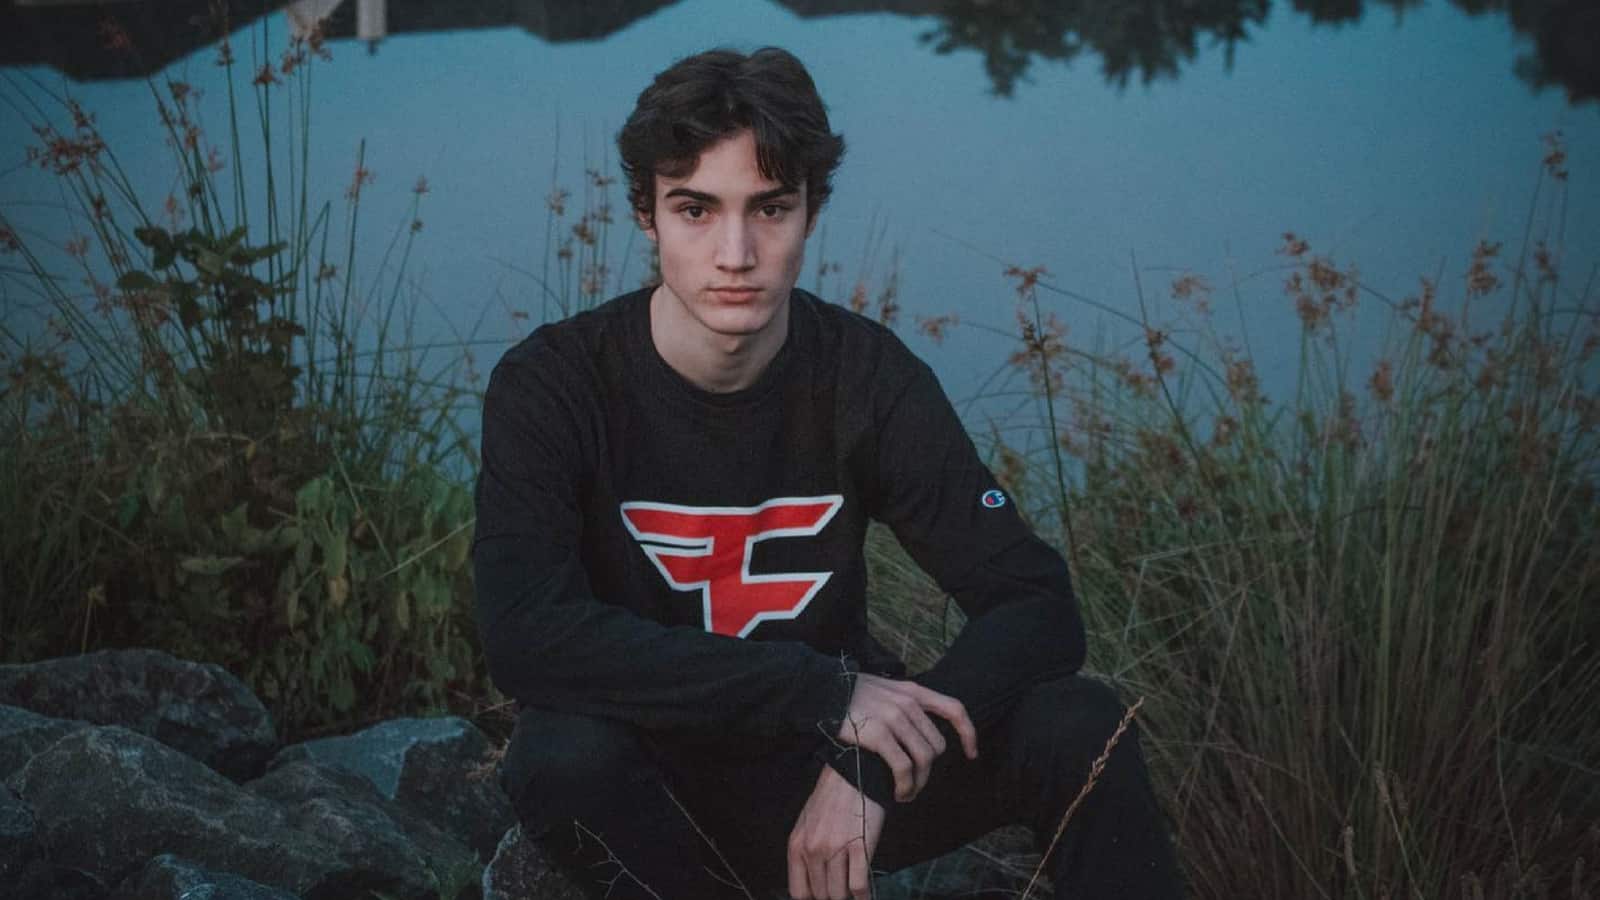 Cented, formerly of FaZe Clan Fortnite.